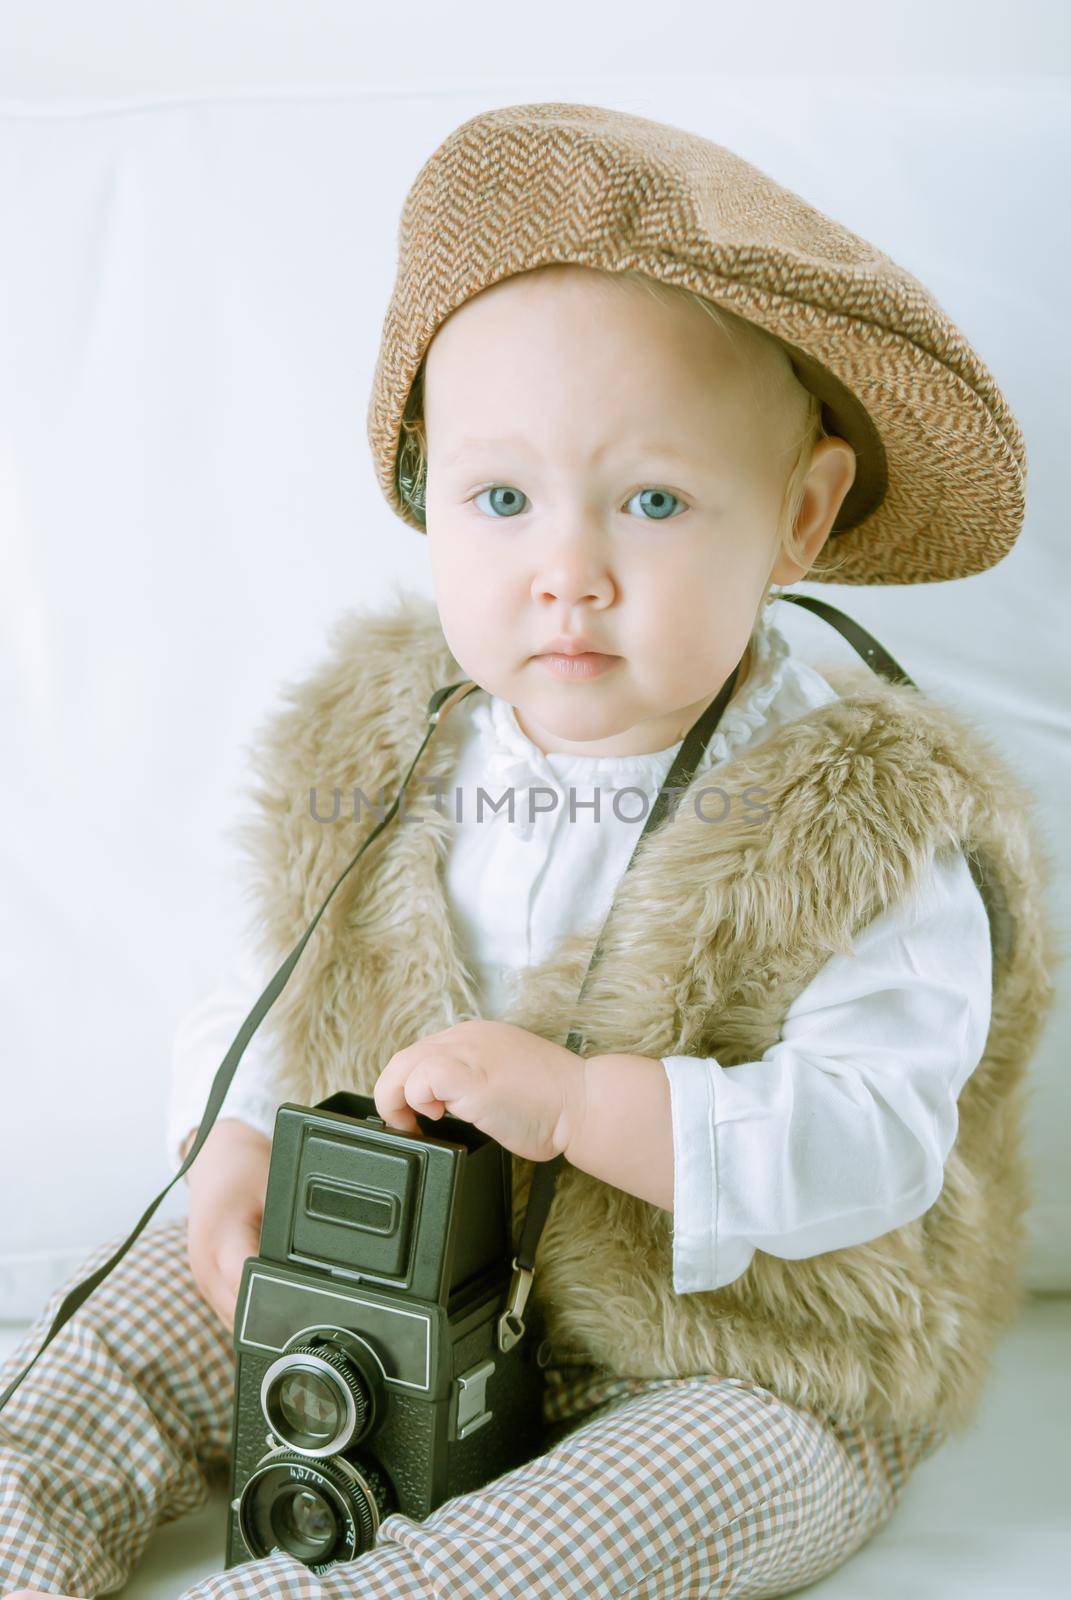 Cute baby with retro camera. High quality photo